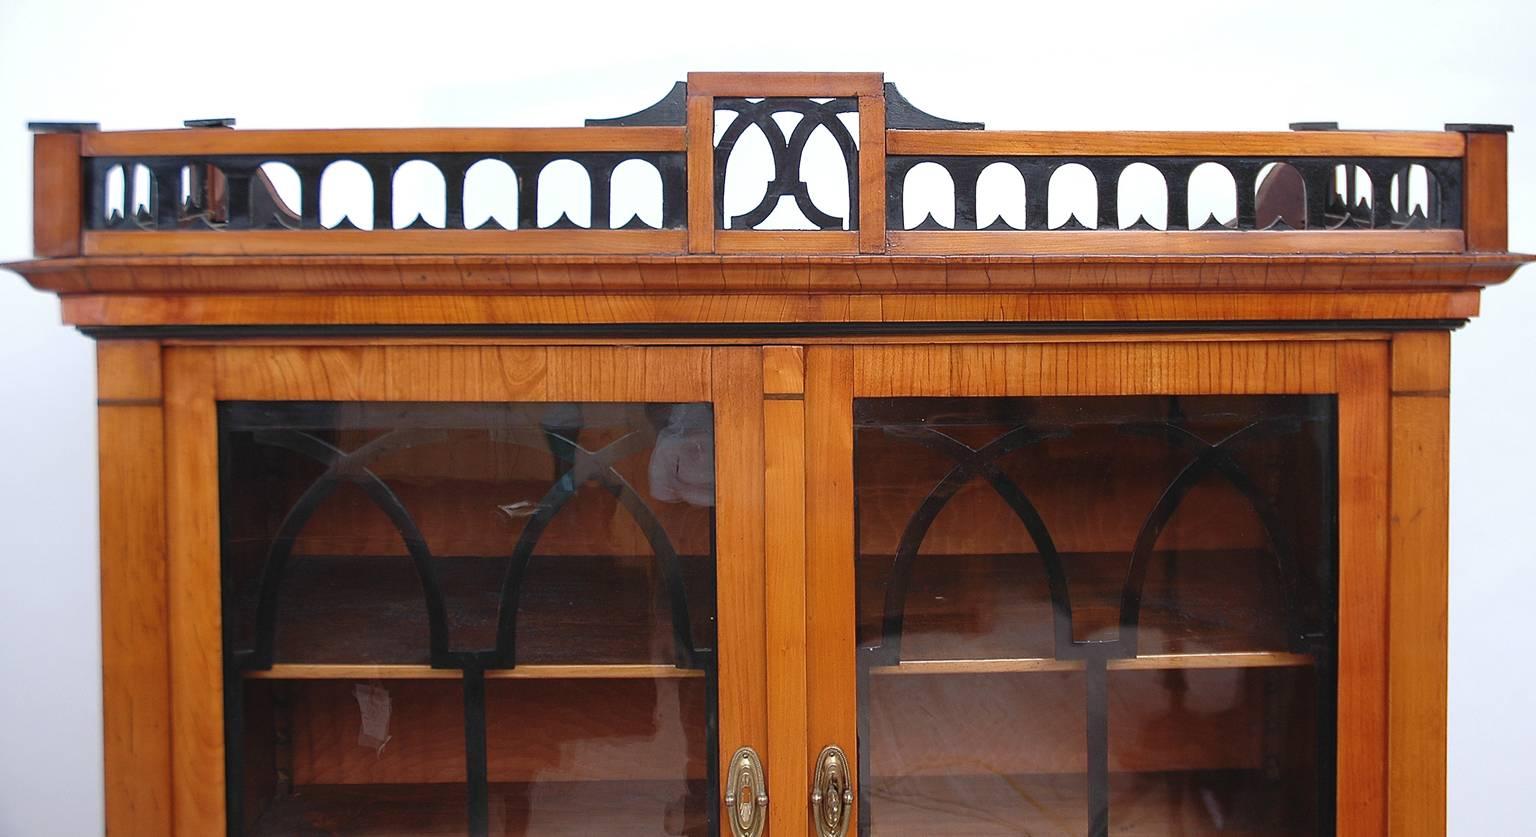 An Austrian Biedermeier vitrine in cherrywood with carved, open fretwork gallery, with ebonized details above crown molding. Arched lattice work on interior of glass doors is ebonized as are various moldings throughout. Offers display storage in